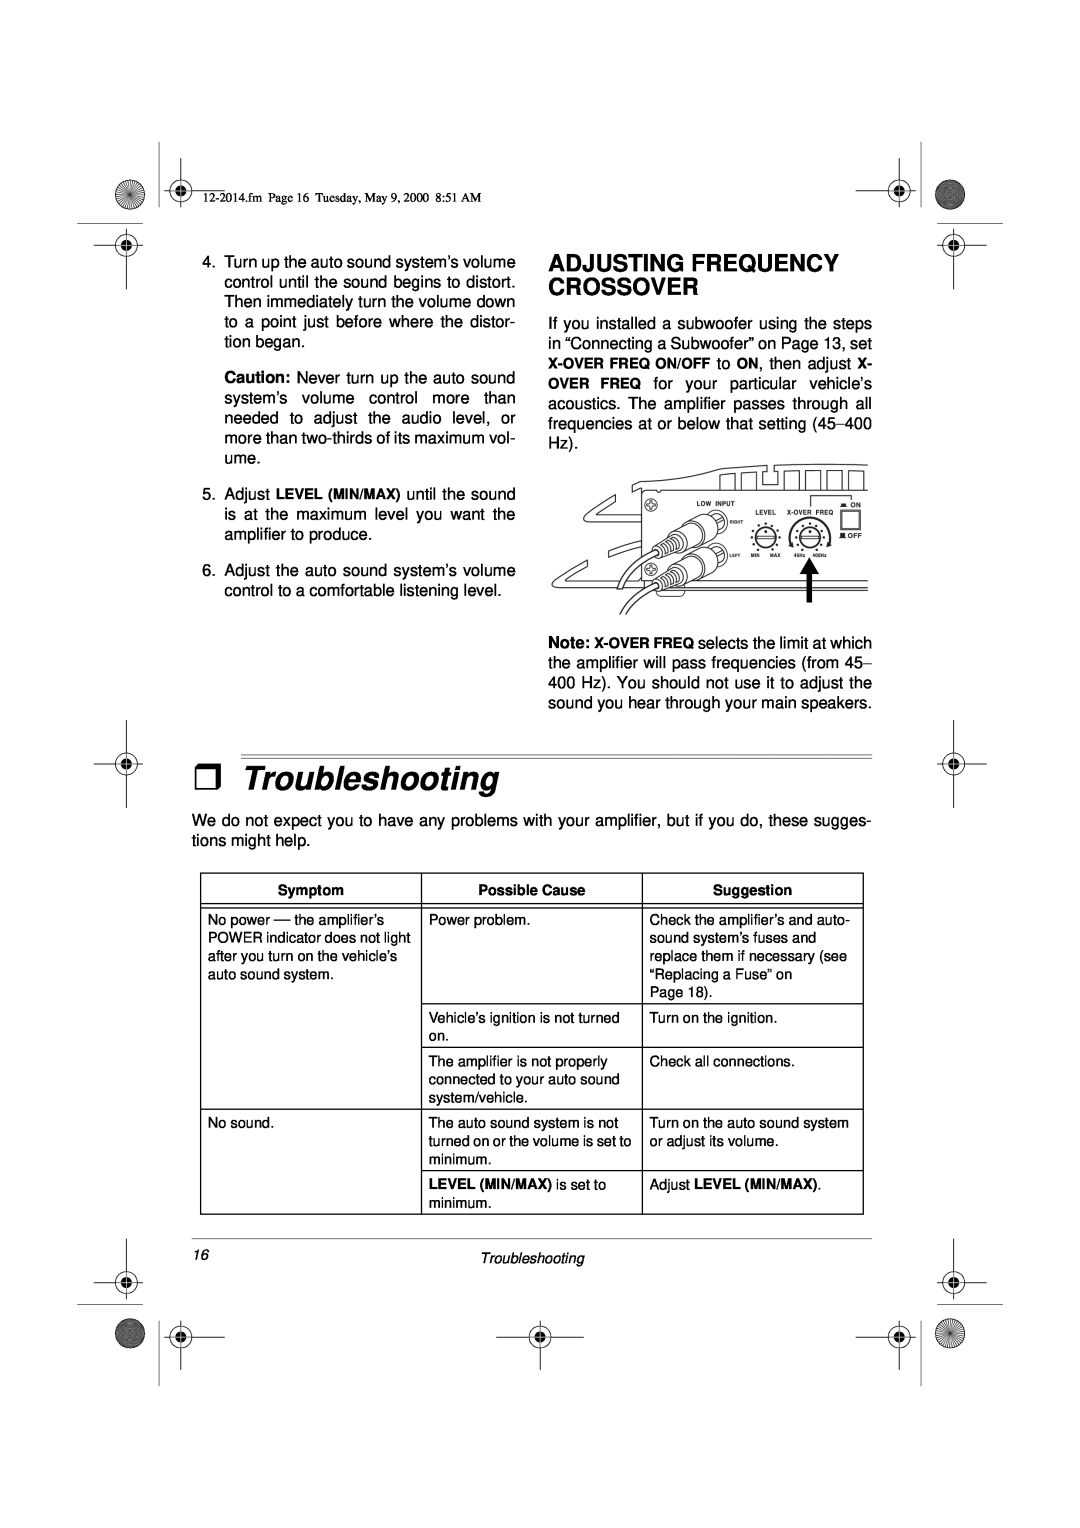 Radio Shack XL-110 owner manual ˆTroubleshooting, Adjusting Frequency Crossover 